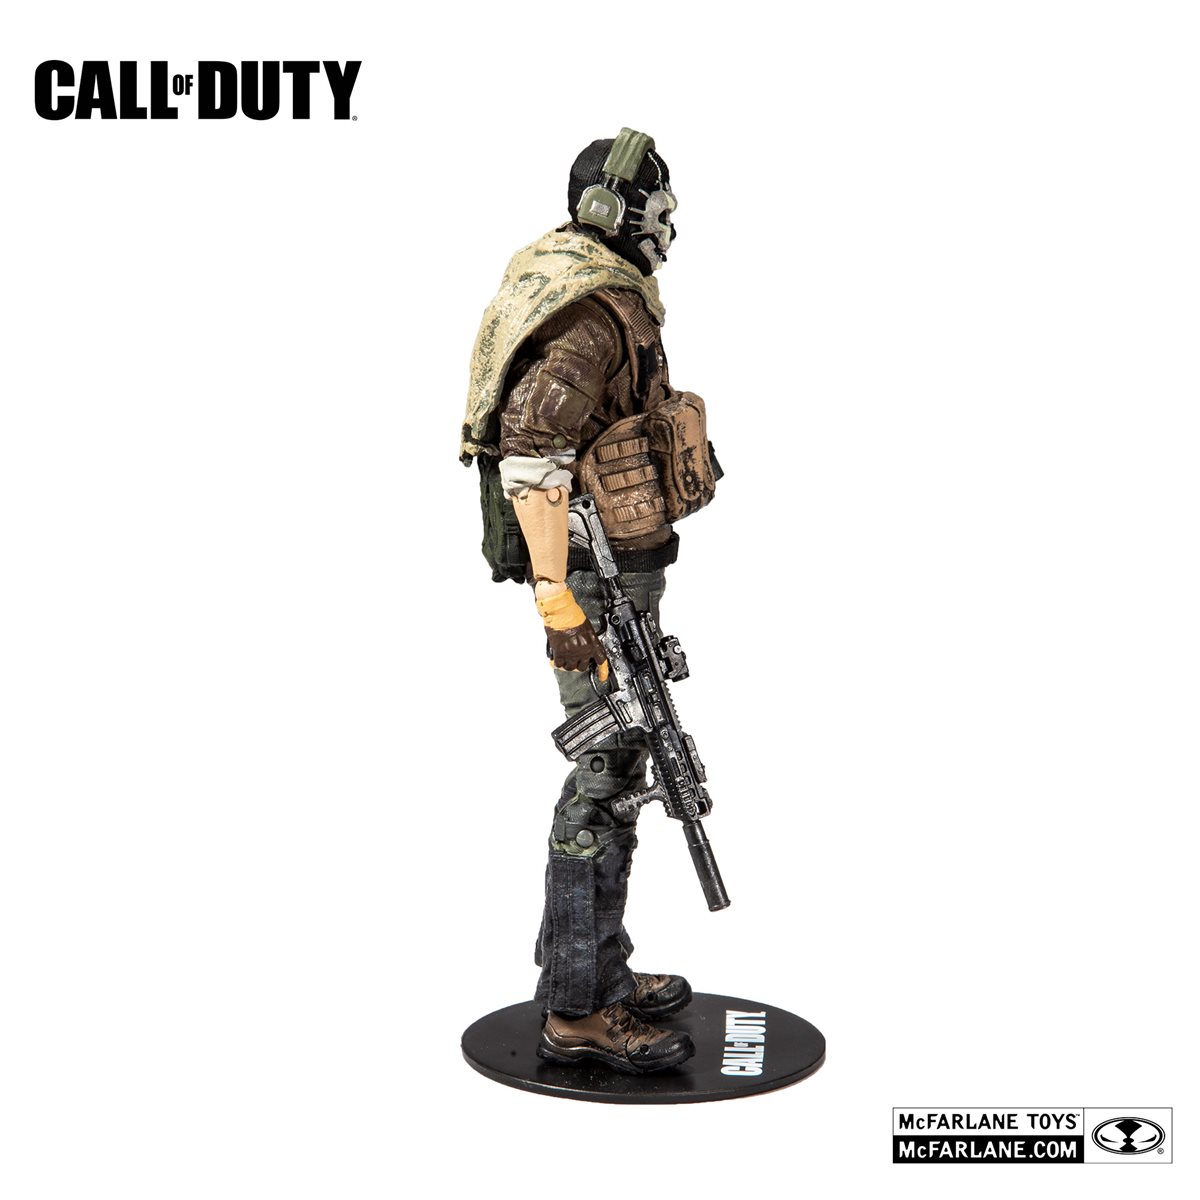 Call of Duty Series 2 Ghost 7-Inch Action Figure - B3a38af6e578474e9fc1f7D32aa9b7a7xl